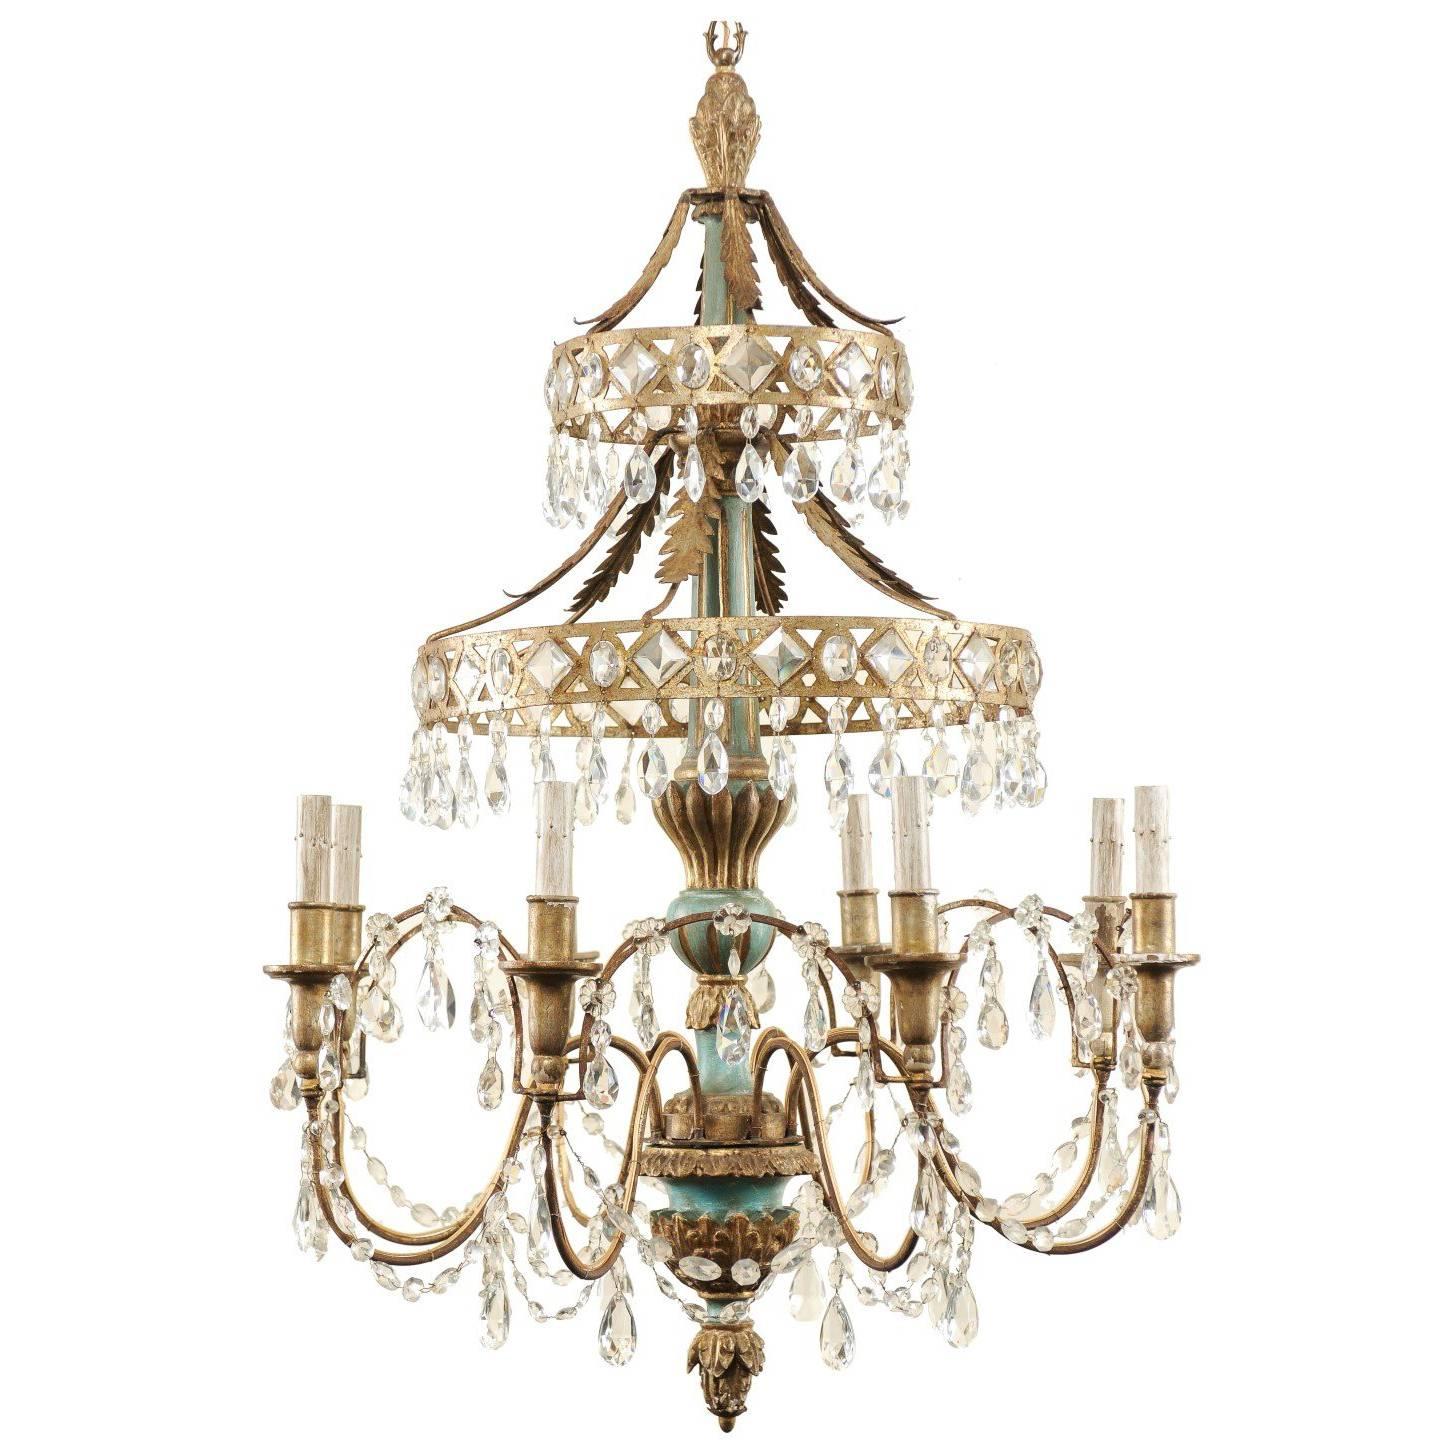 Midcentury Italian Eight-Light Crystal and Wood Chandelier with Pale Teal Tones